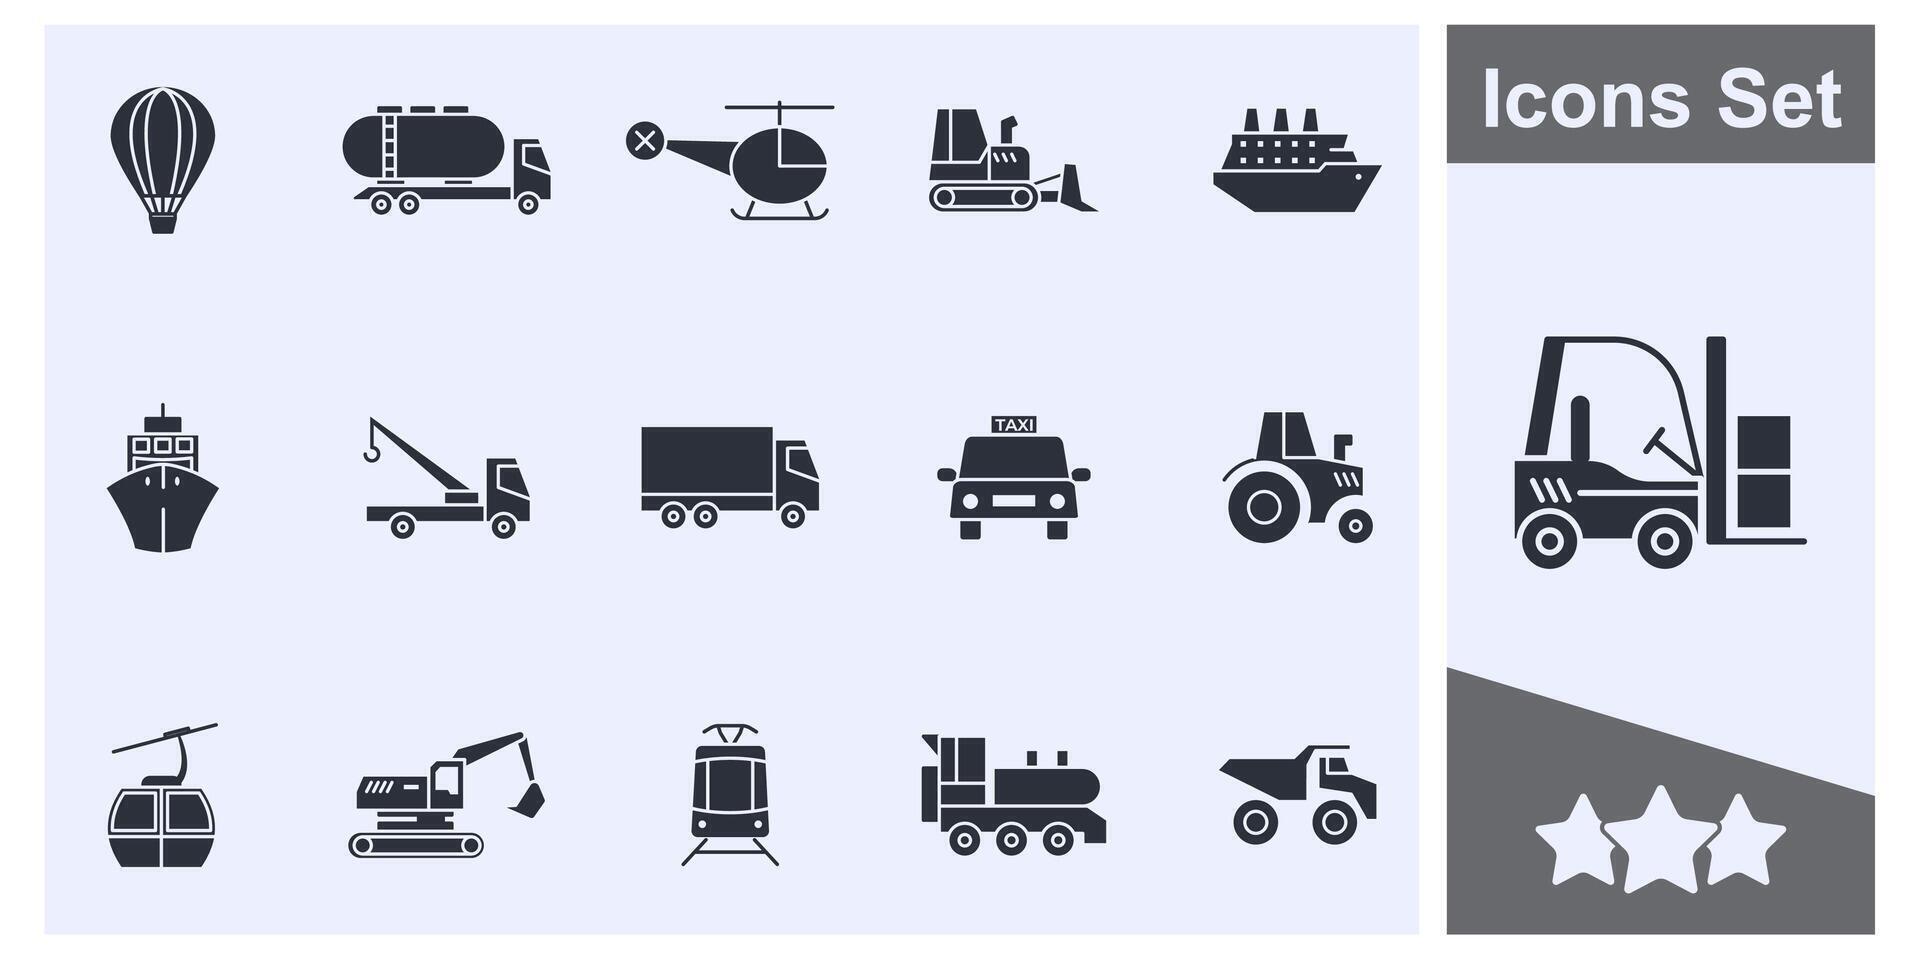 Transport, vehicle and delivery icon set symbol collection, logo isolated illustration vector